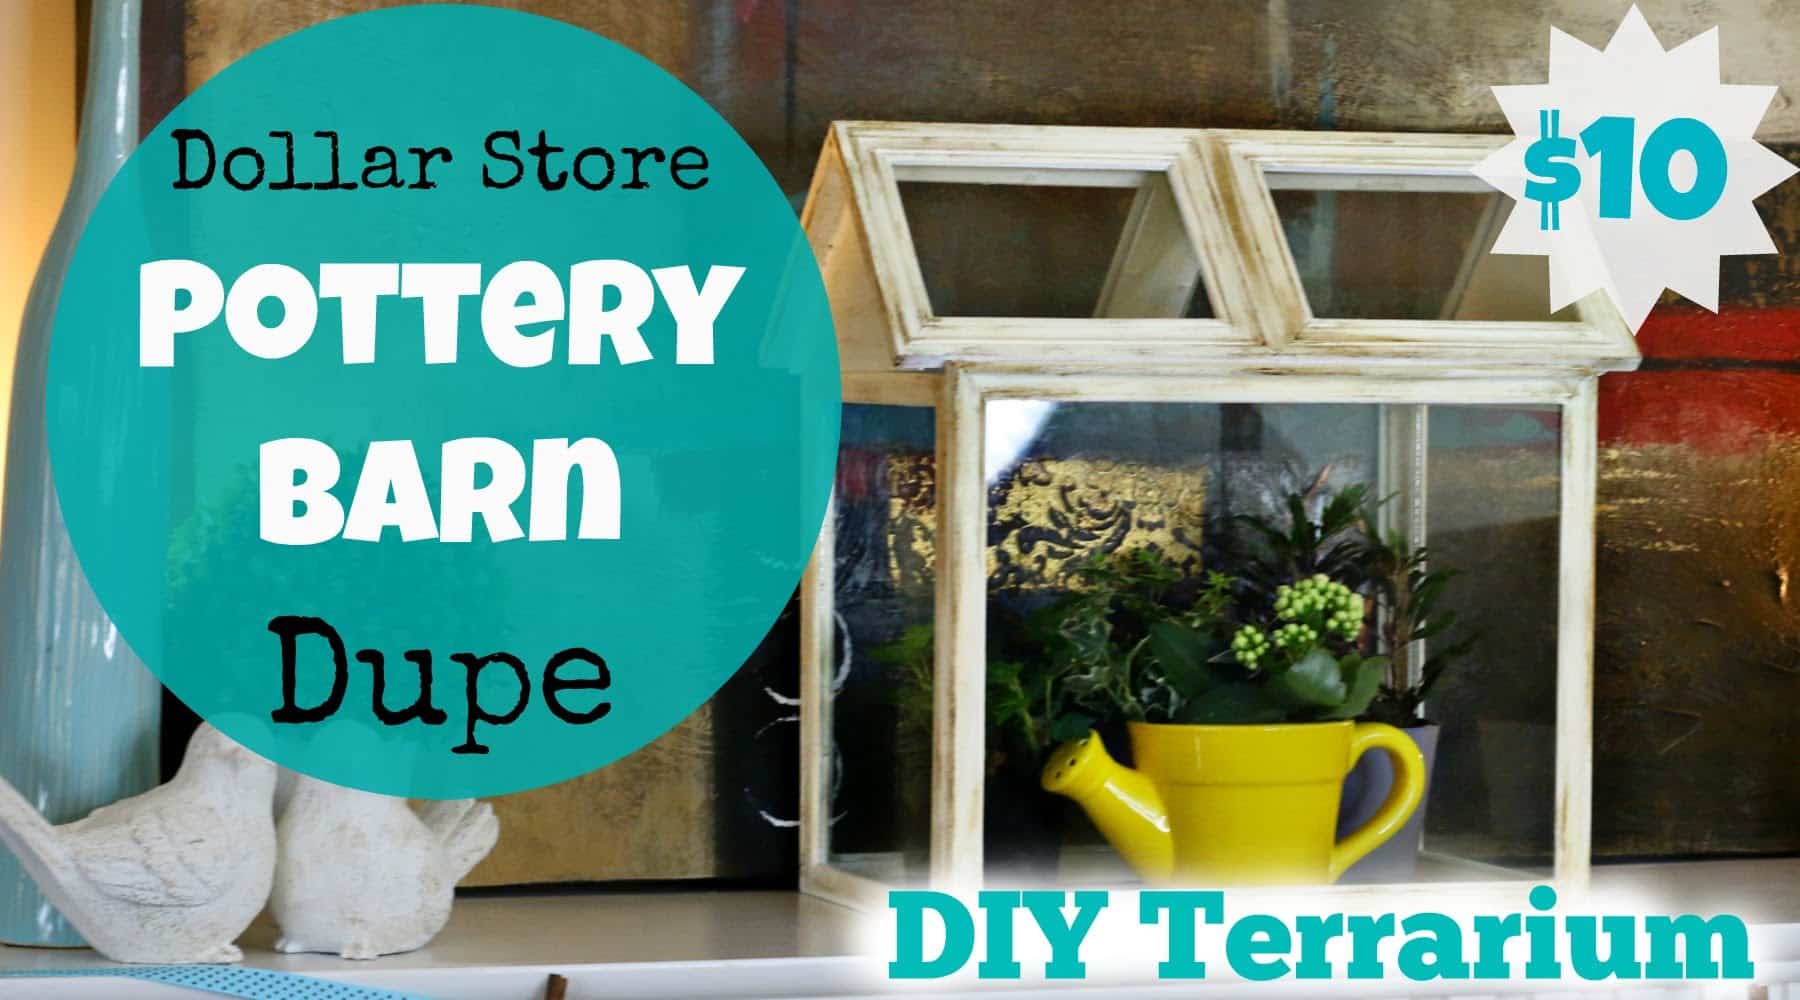 DIY Terrarium Ideas - DIY Pottery Barn Terrarium - Cool Terrariums and Crafts With Mason Jars, Succulents, Wood, Geometric Designs and Reptile, Acquarium - Easy DIY Terrariums for Adults and Kids To Make at Home 